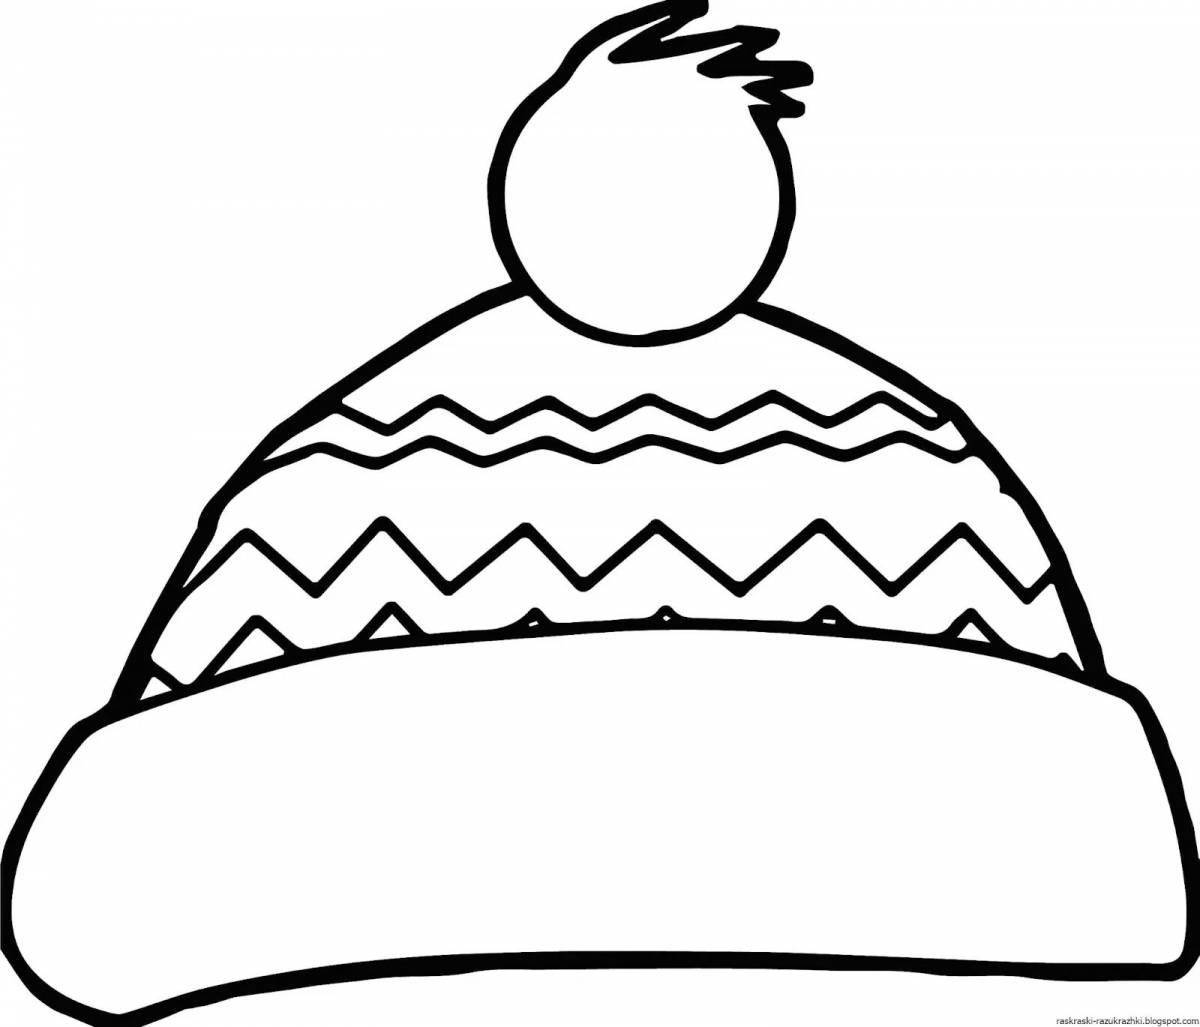 Coloring book funny winter hat for kids